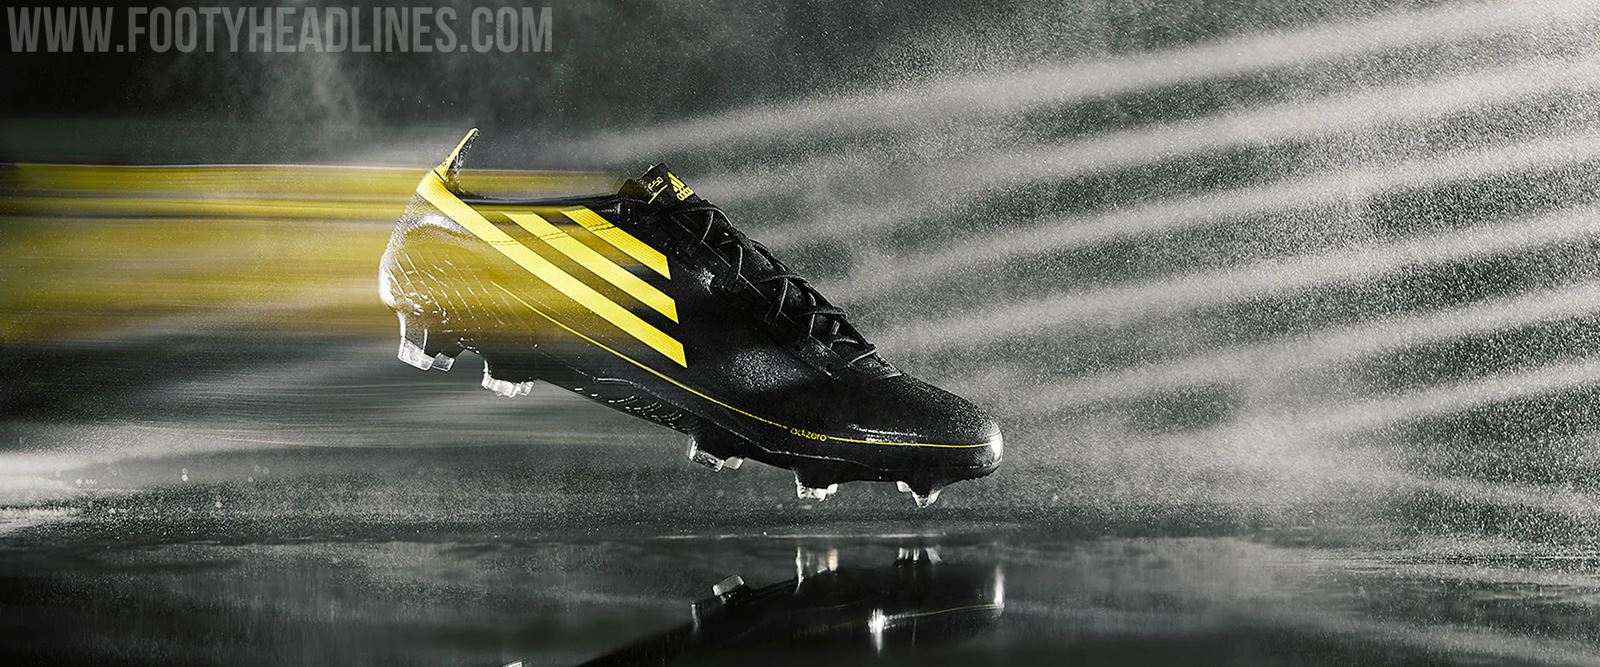 Black & Yellow F50 X Ghosted Adizero 2010-2020 Remake Boots Released - Footy Headlines